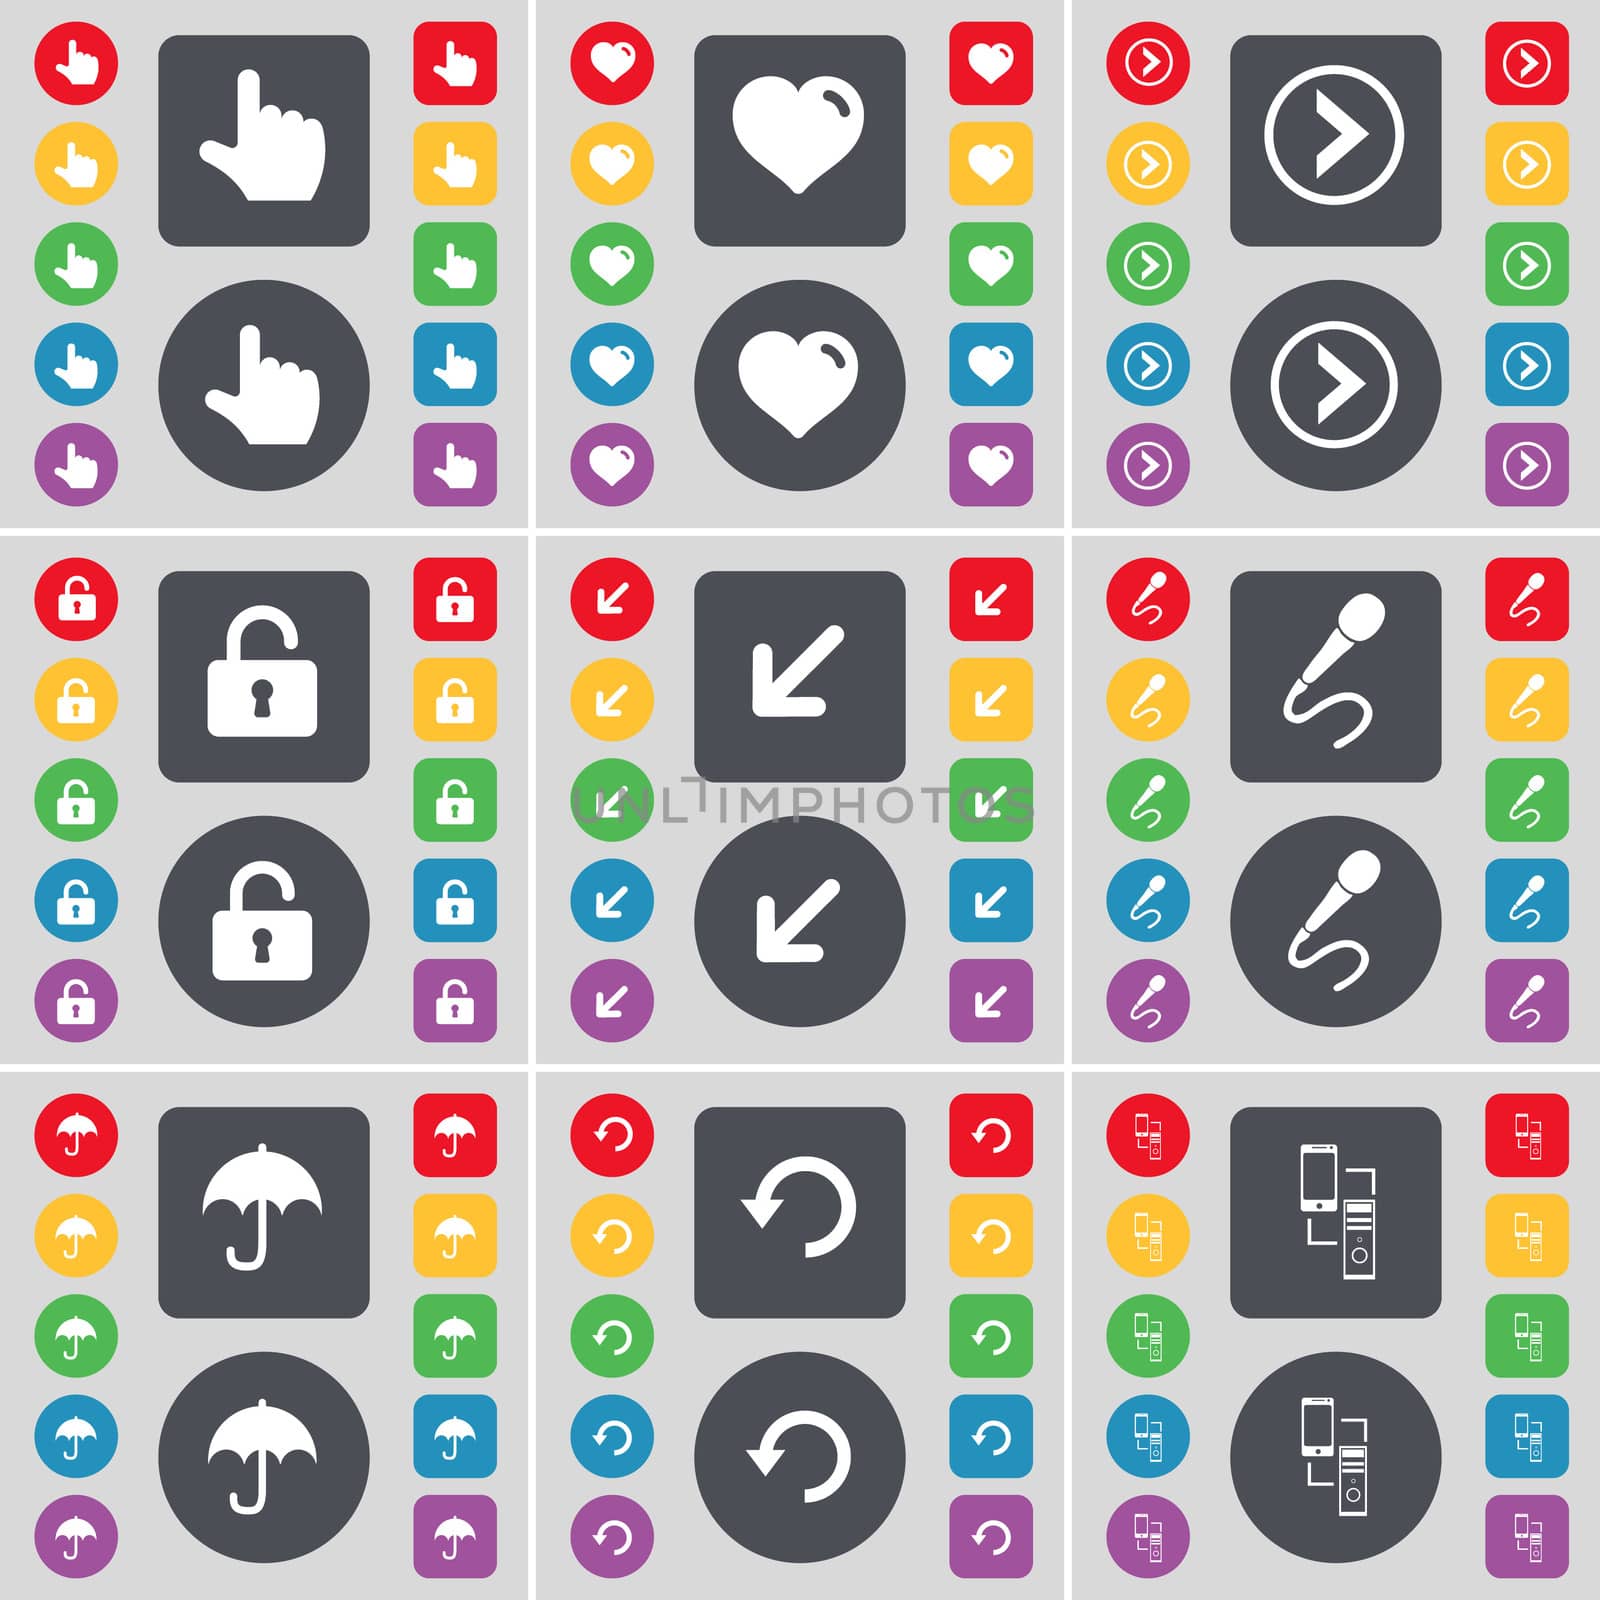 Hand, Heart, Arrow right, Lock, Deploying screen, Microphone, Umbrella, Reload, Connection icon symbol. A large set of flat, colored buttons for your design. illustration